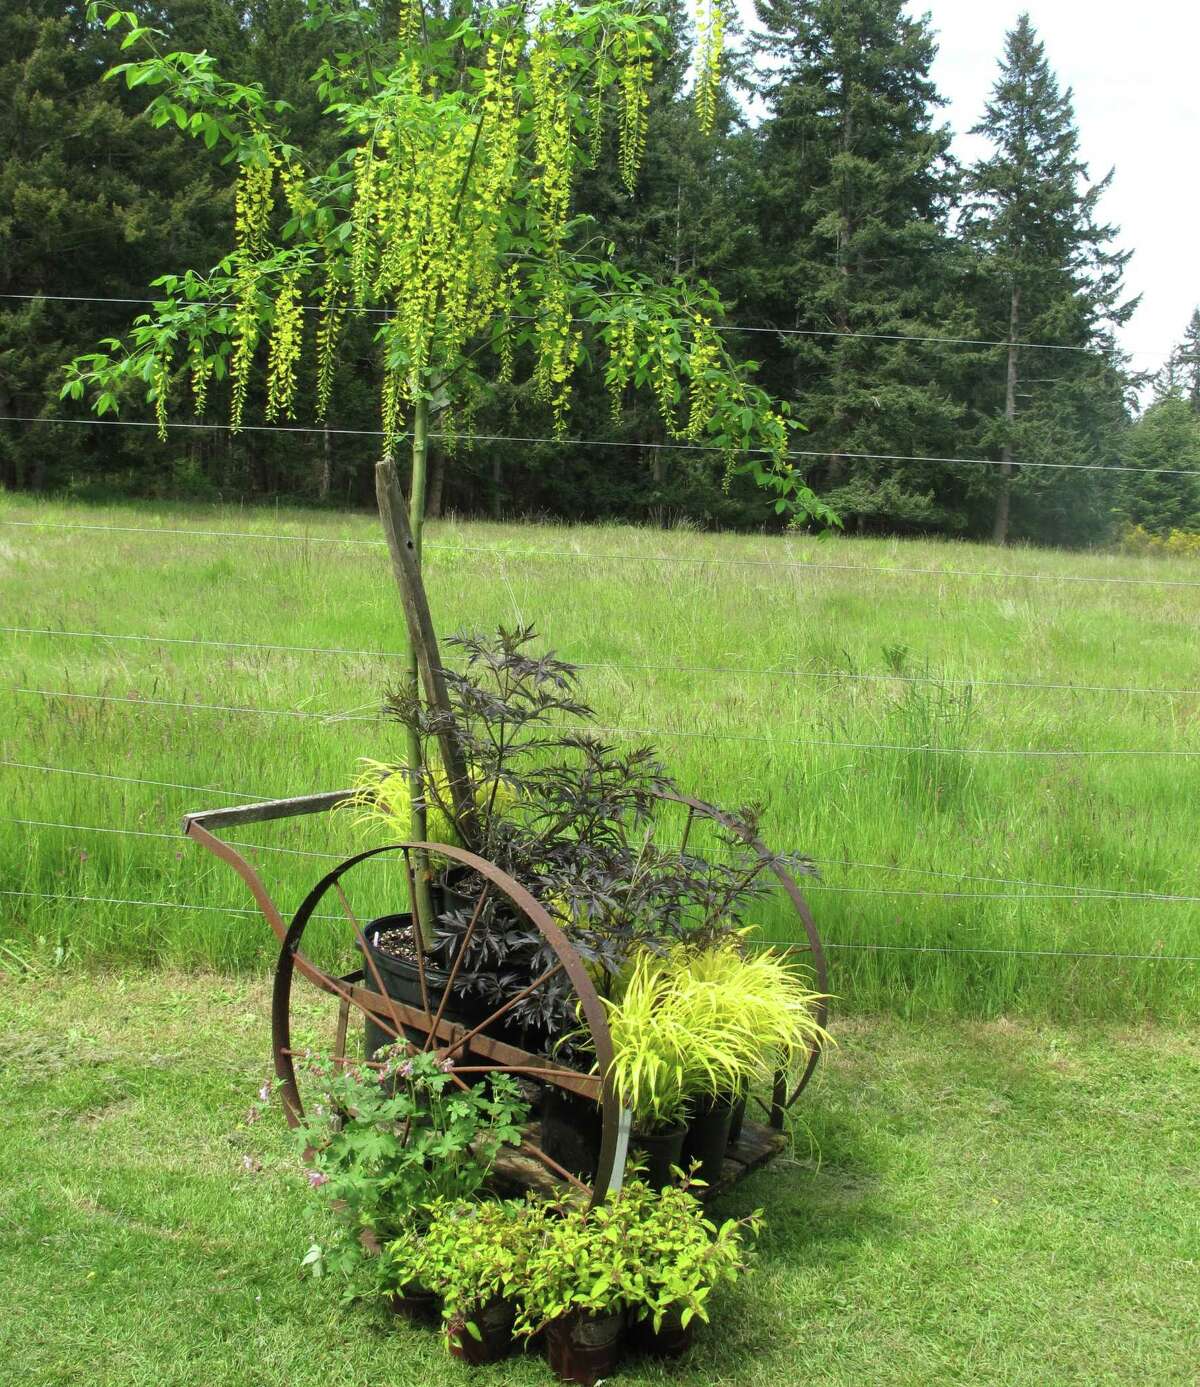 Wheeled devices, like this old cart at Cultus Bay Nursery and Garden near Clinton, Wash., serve as attractive plant beds that can be moved across the country or simply pushed into a sunny corner of the patio.